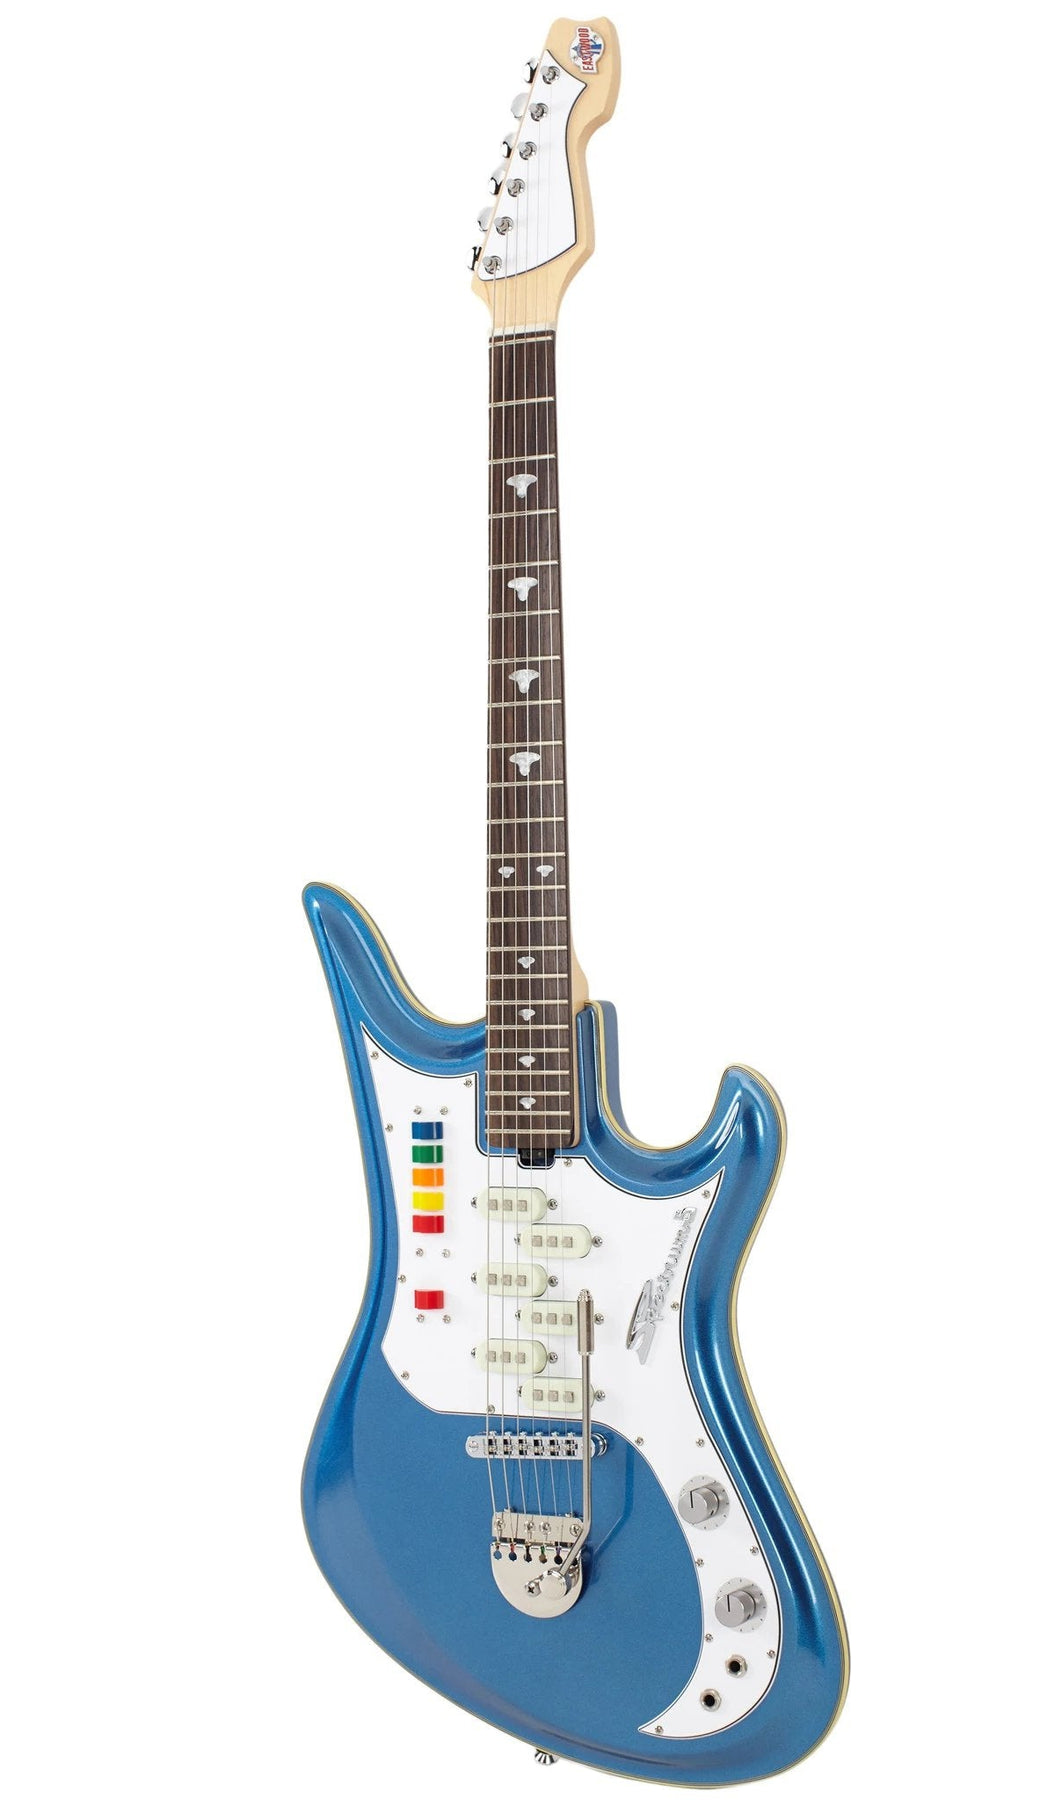 Eastwood-Guitars_Spectrum5PRO_MetallicBlue_Right-hand_Full-front-angled_1800x1800.jpg